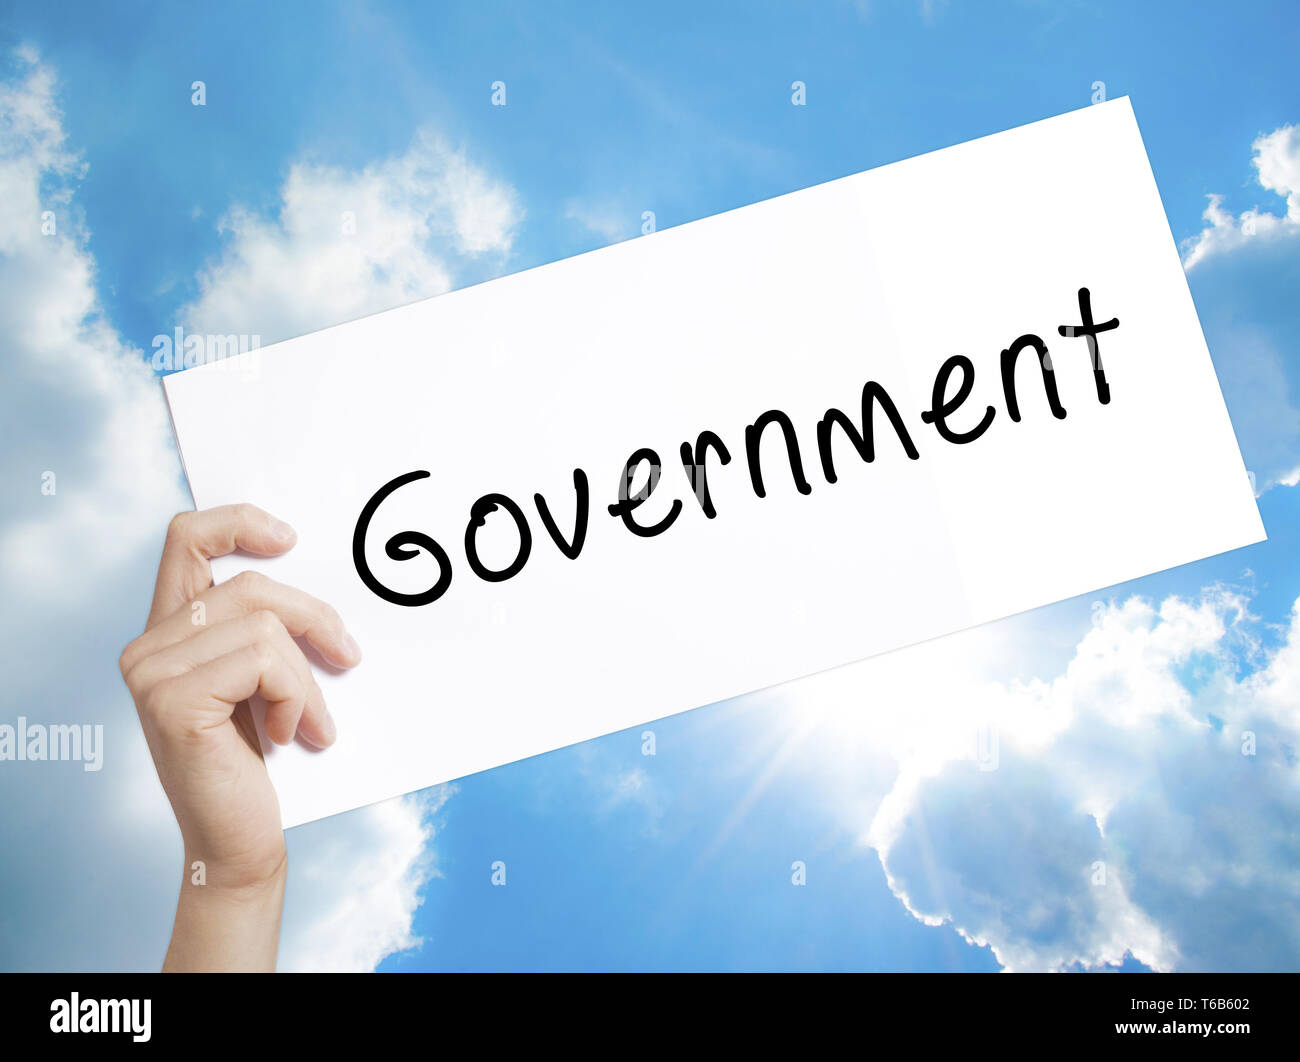 Government Sign on white paper. Man Hand Holding Paper with text. Isolated on sky background Stock Photo